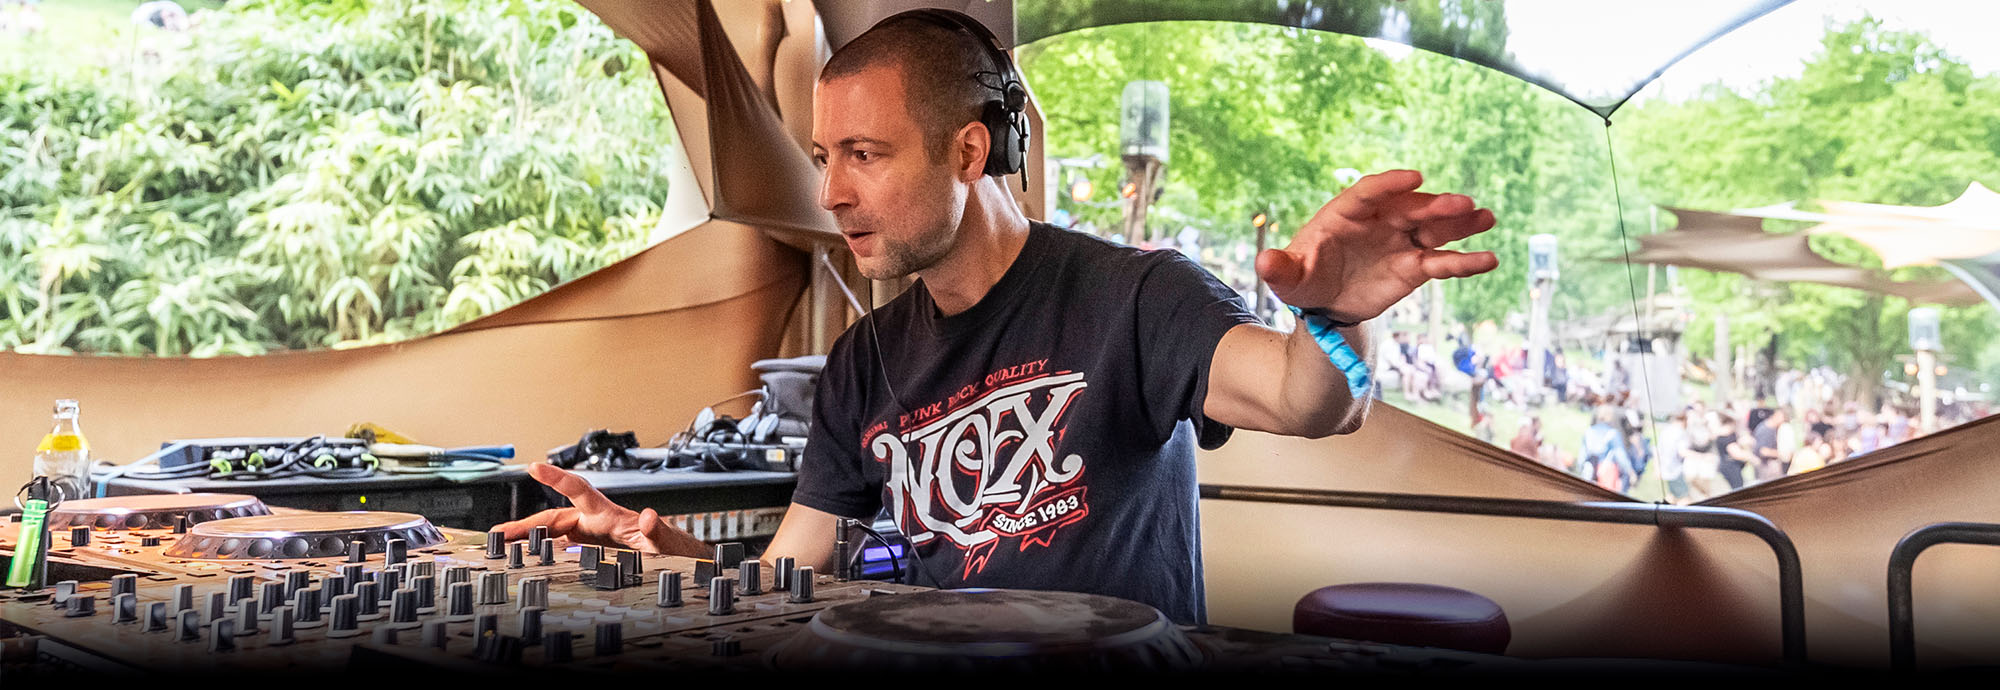 Sabretooth, psy trance producer, DJing at a festival in Germany